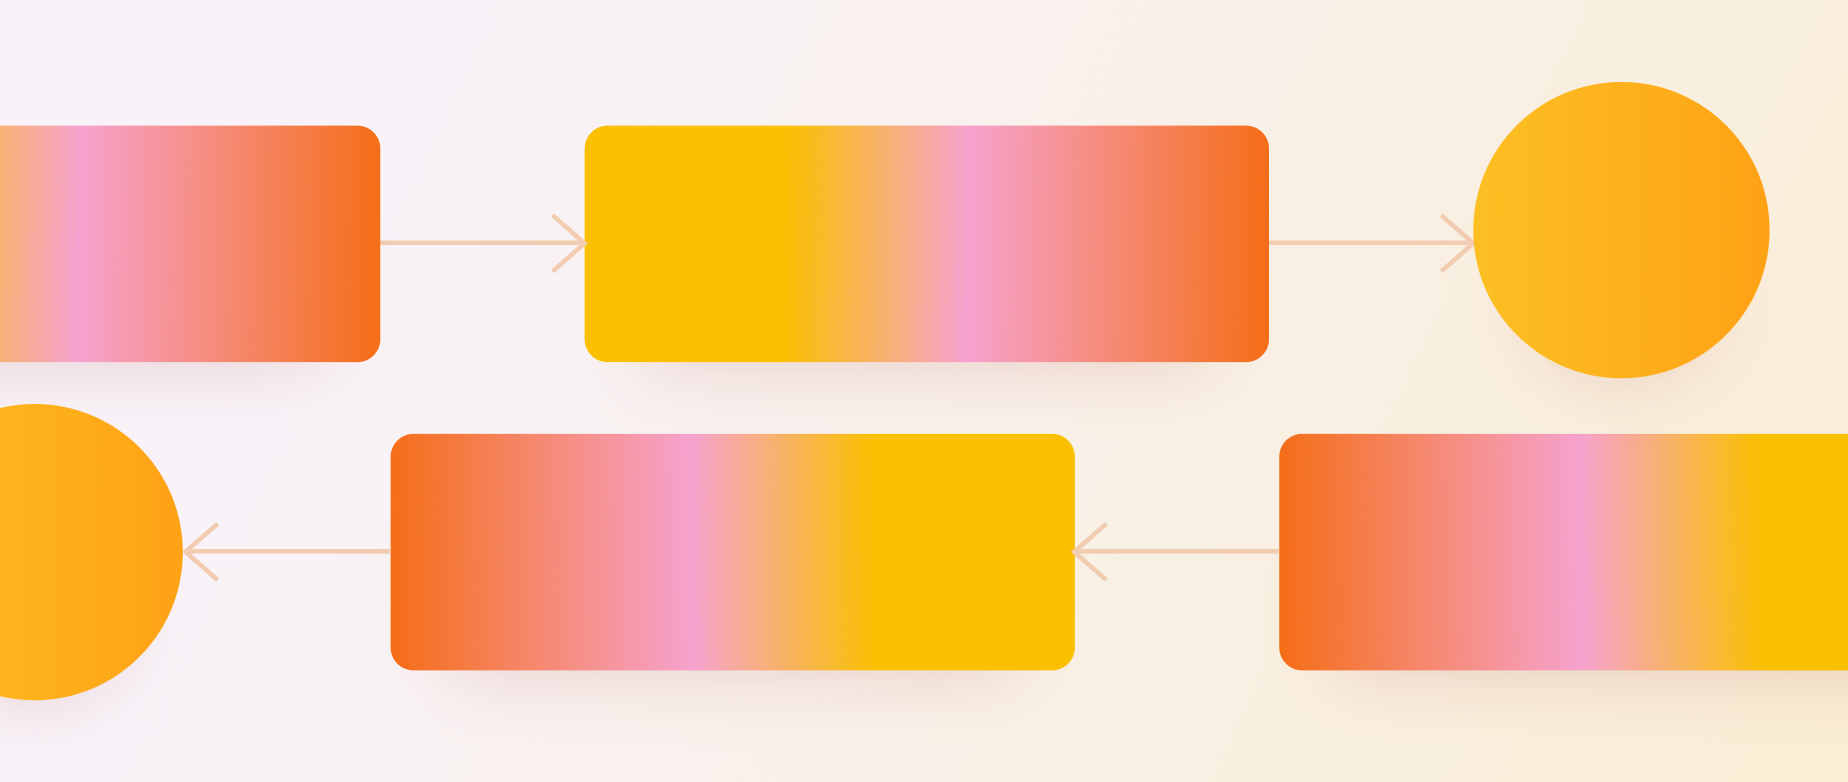 A pink and yellow flow chart with circles, rectangles, and arrows.